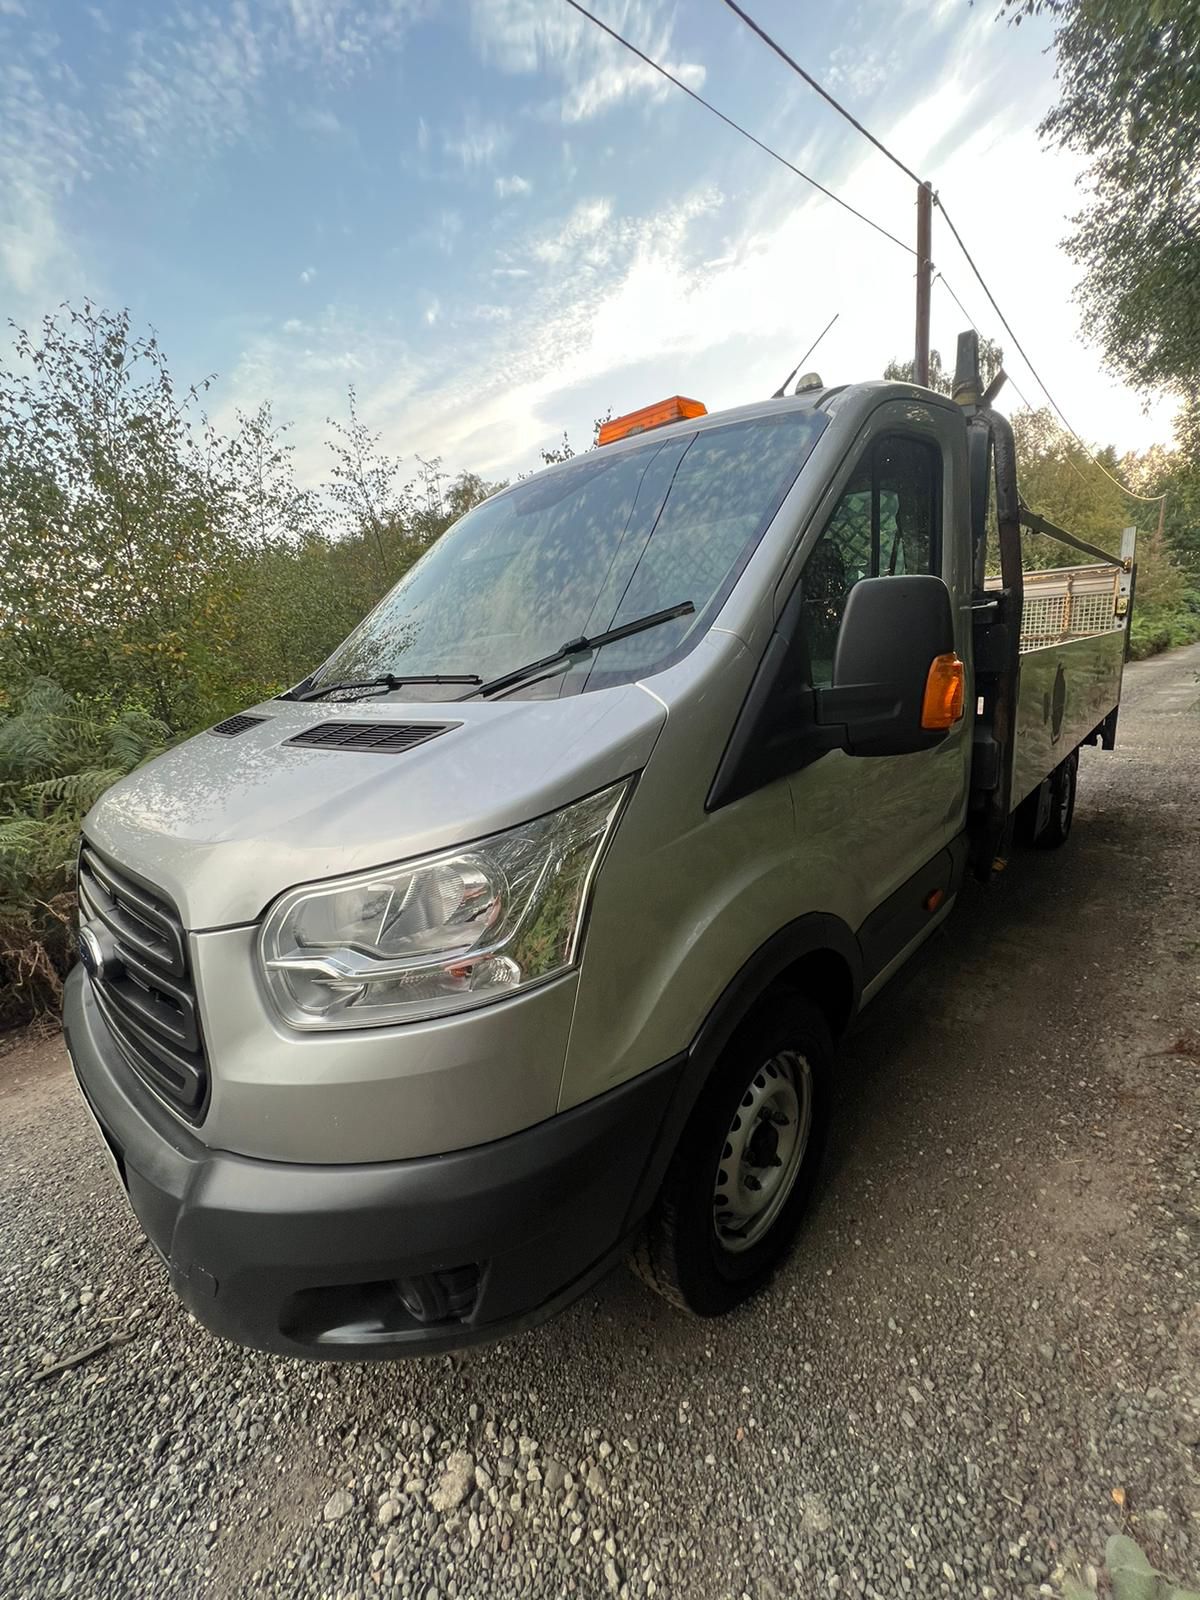 Bid on FORD TRANSIT 2016 FLATBED WITH TAIL LIFT 14 FT DROPSIDE BODY- Buy &amp; Sell on Auction with EAMA Group